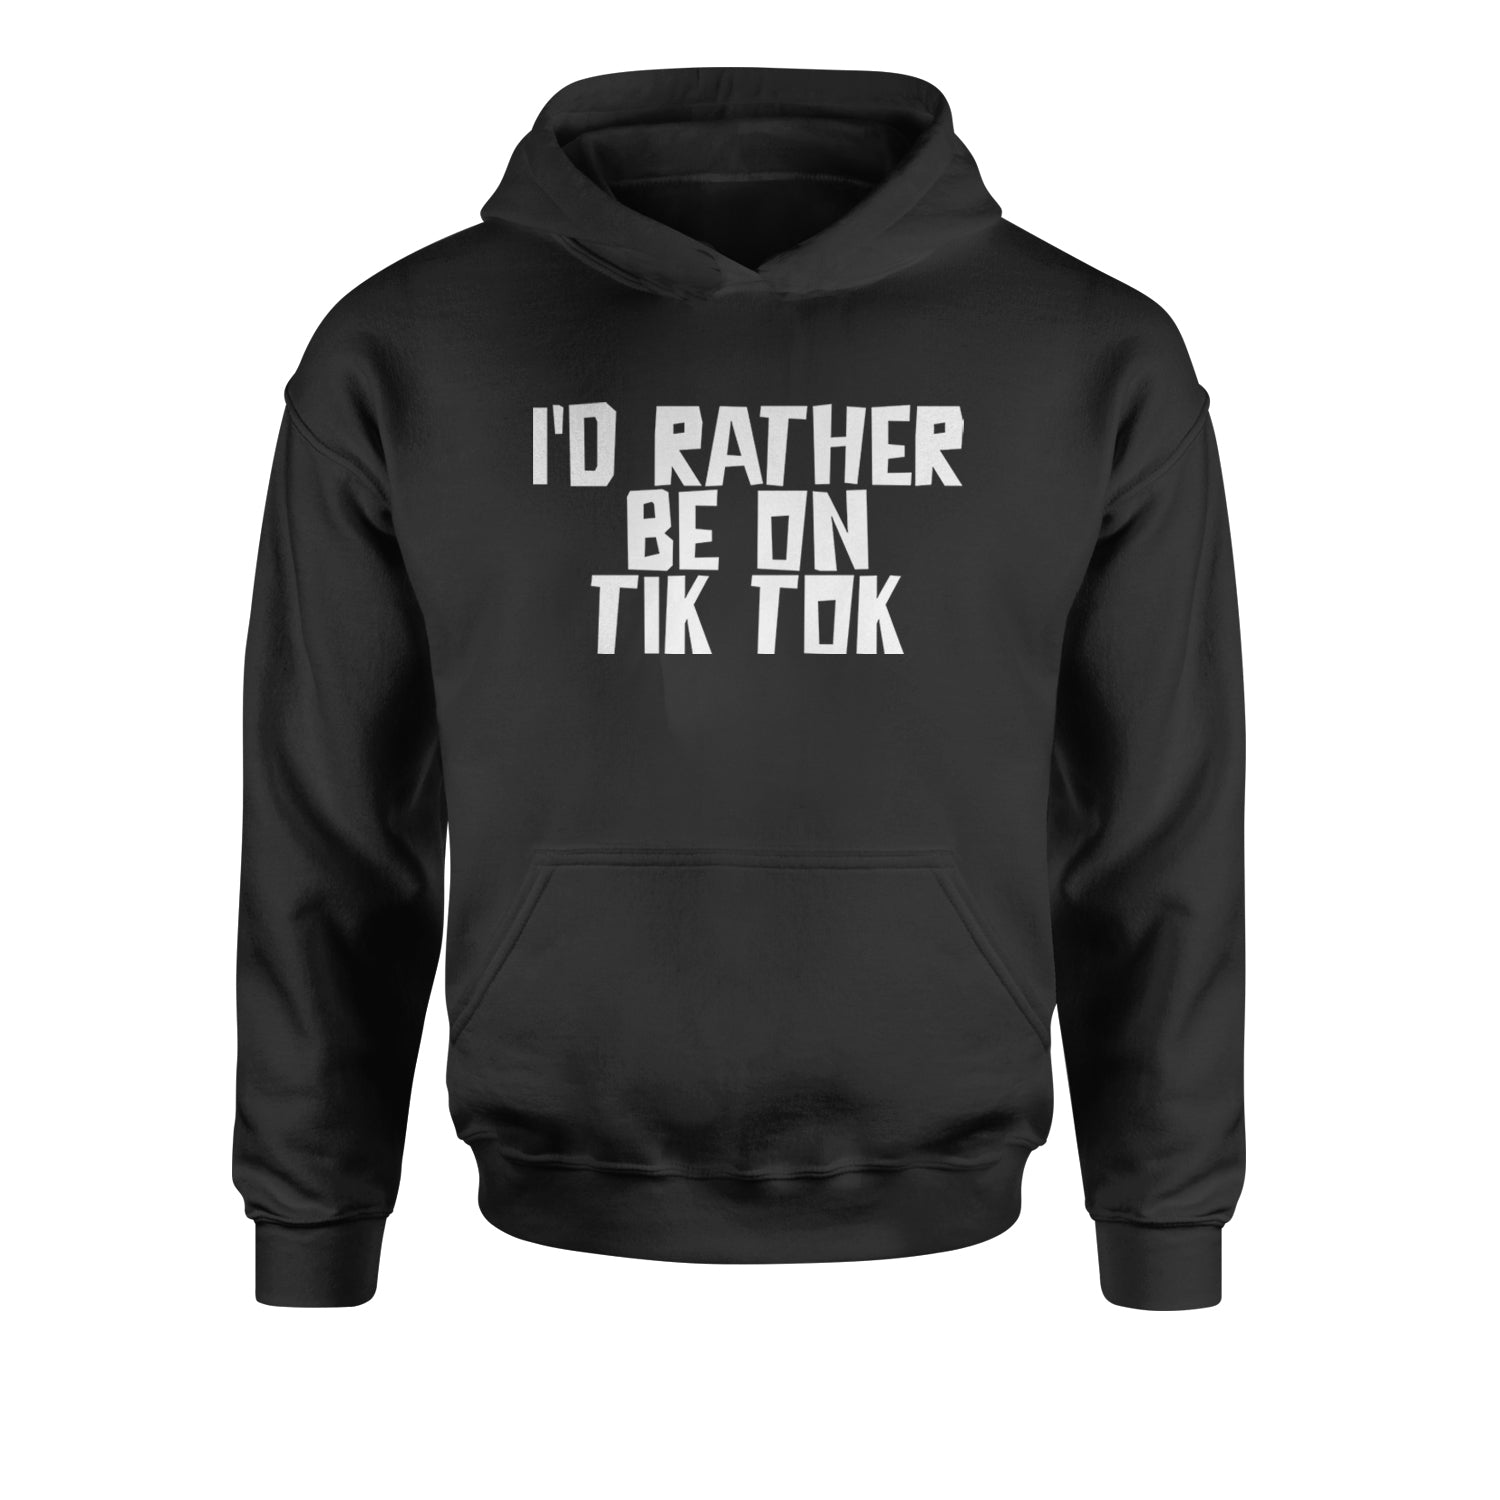 I'd Rather Be On TikTok Youth-Sized Hoodie